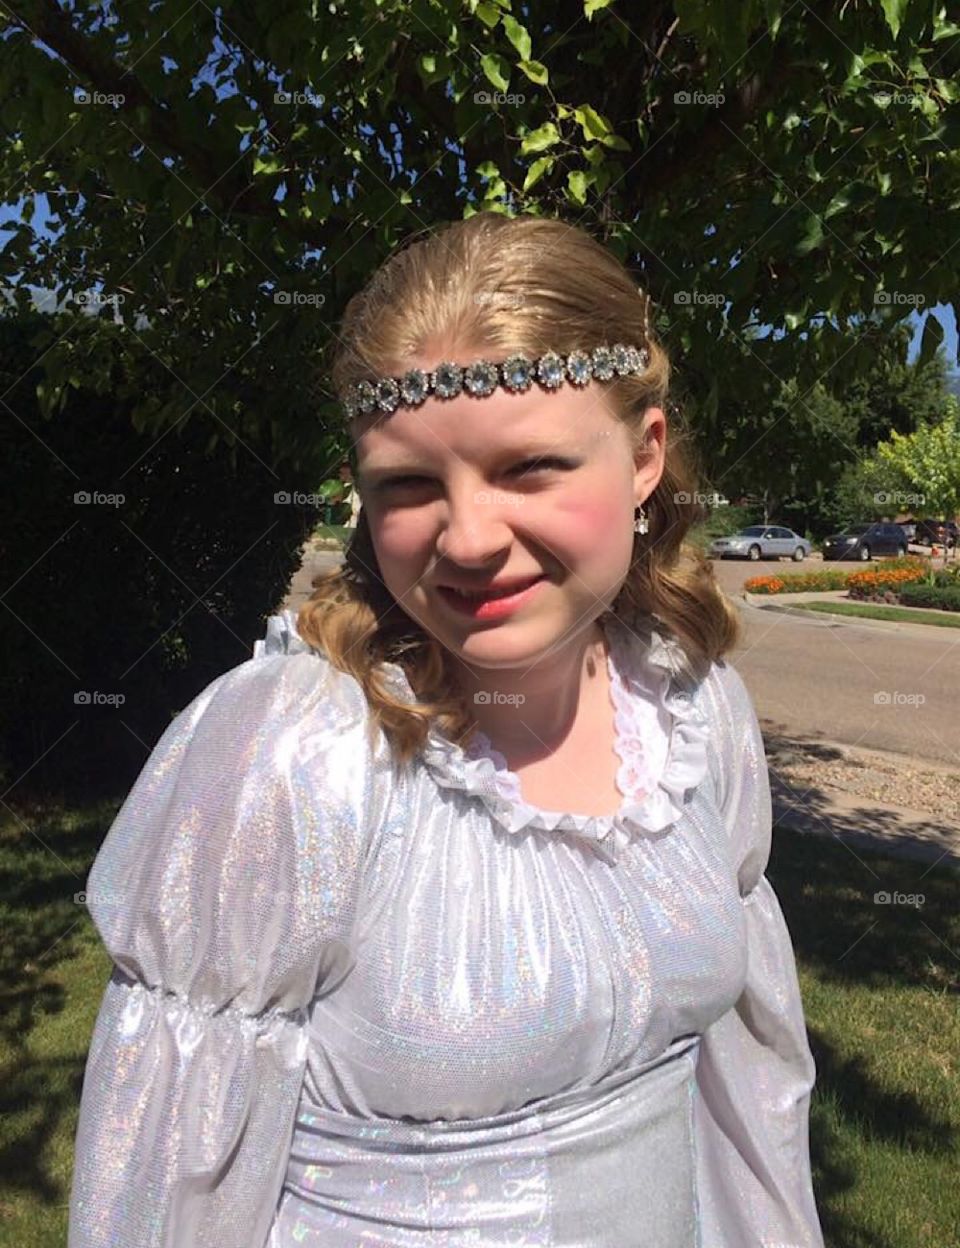 My lil’ poser in her silver fountain costume for summer theatre.